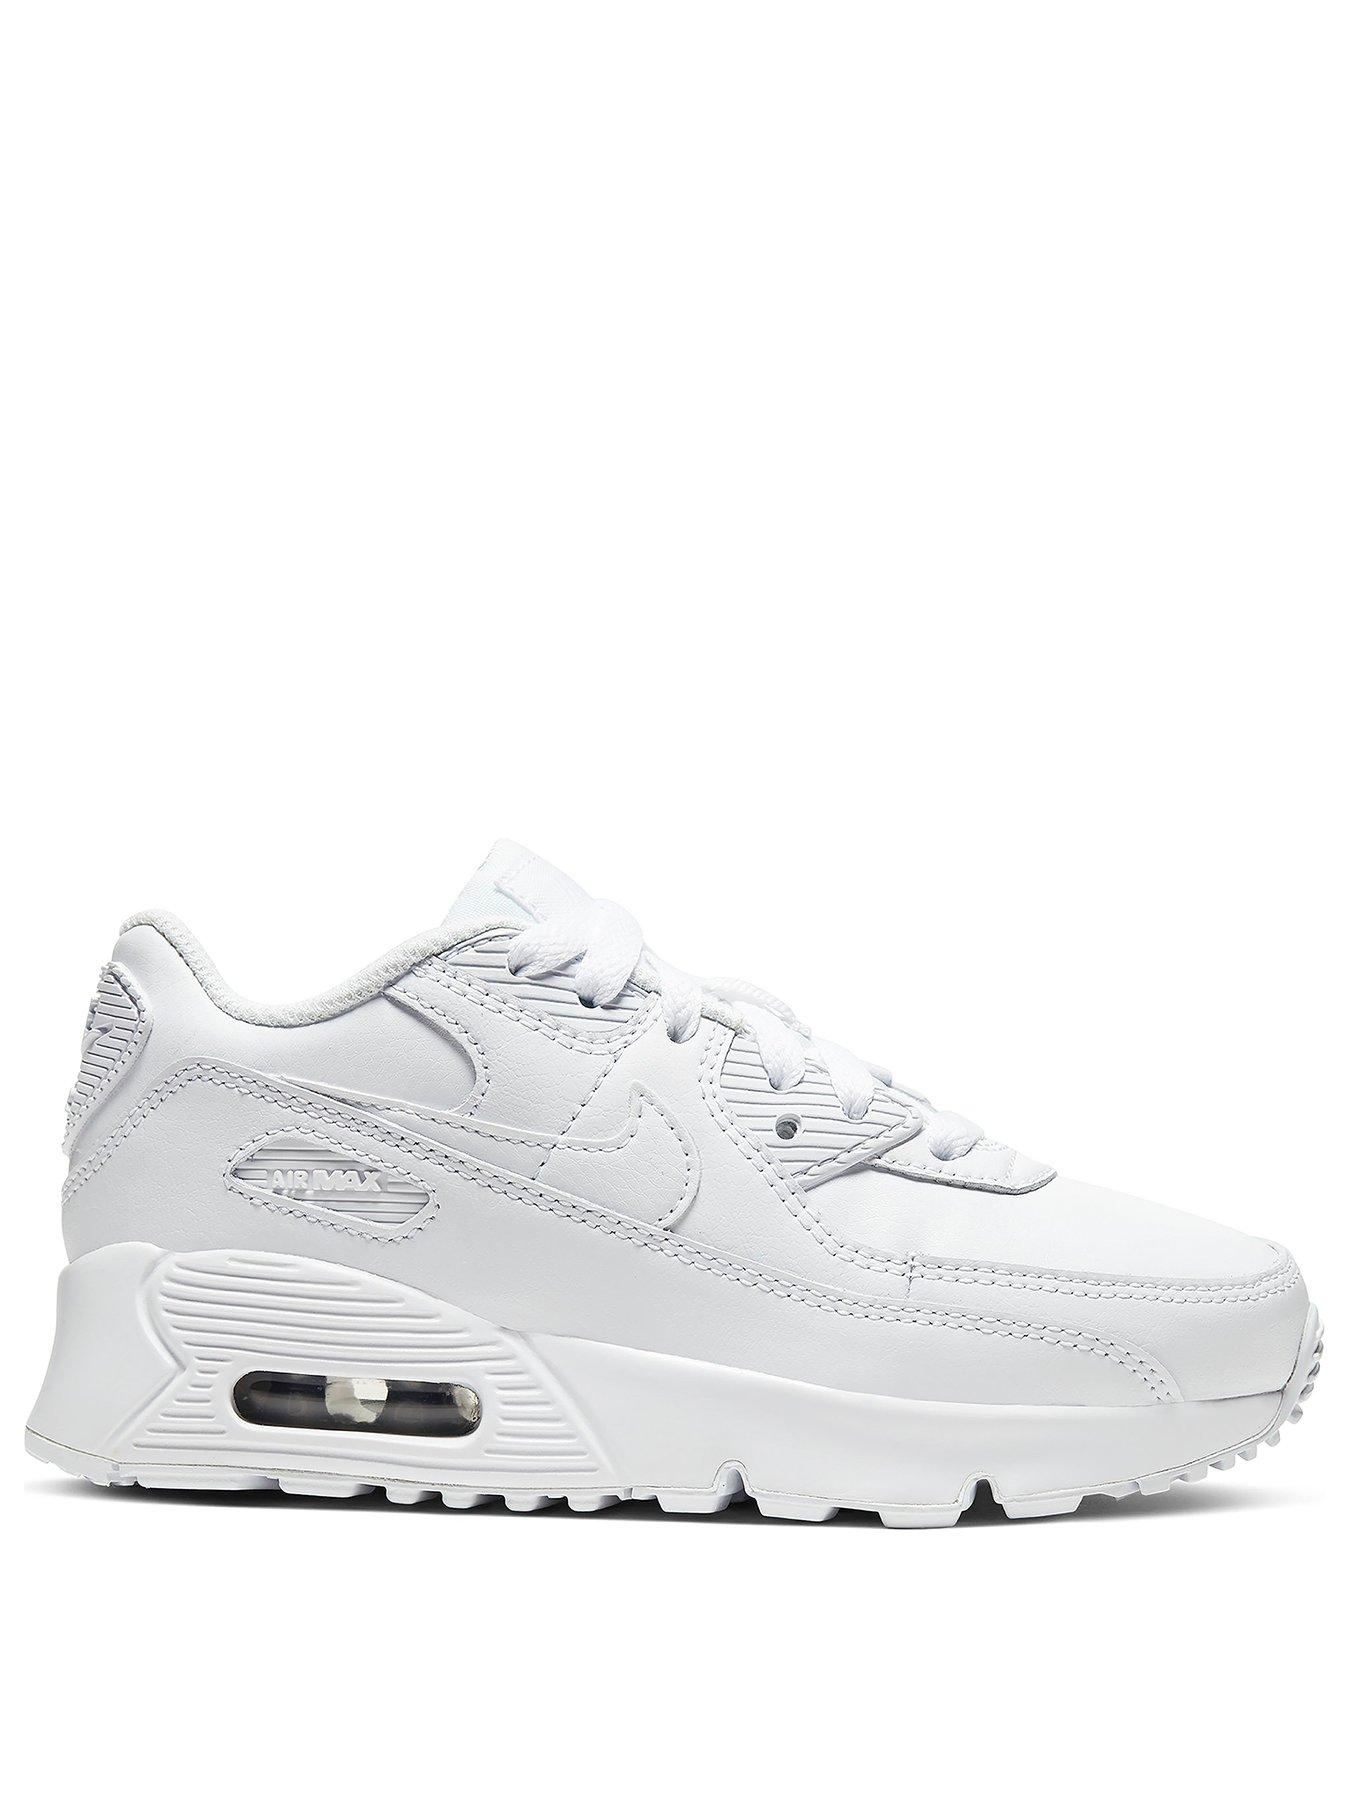 childrens size 2 nike air max